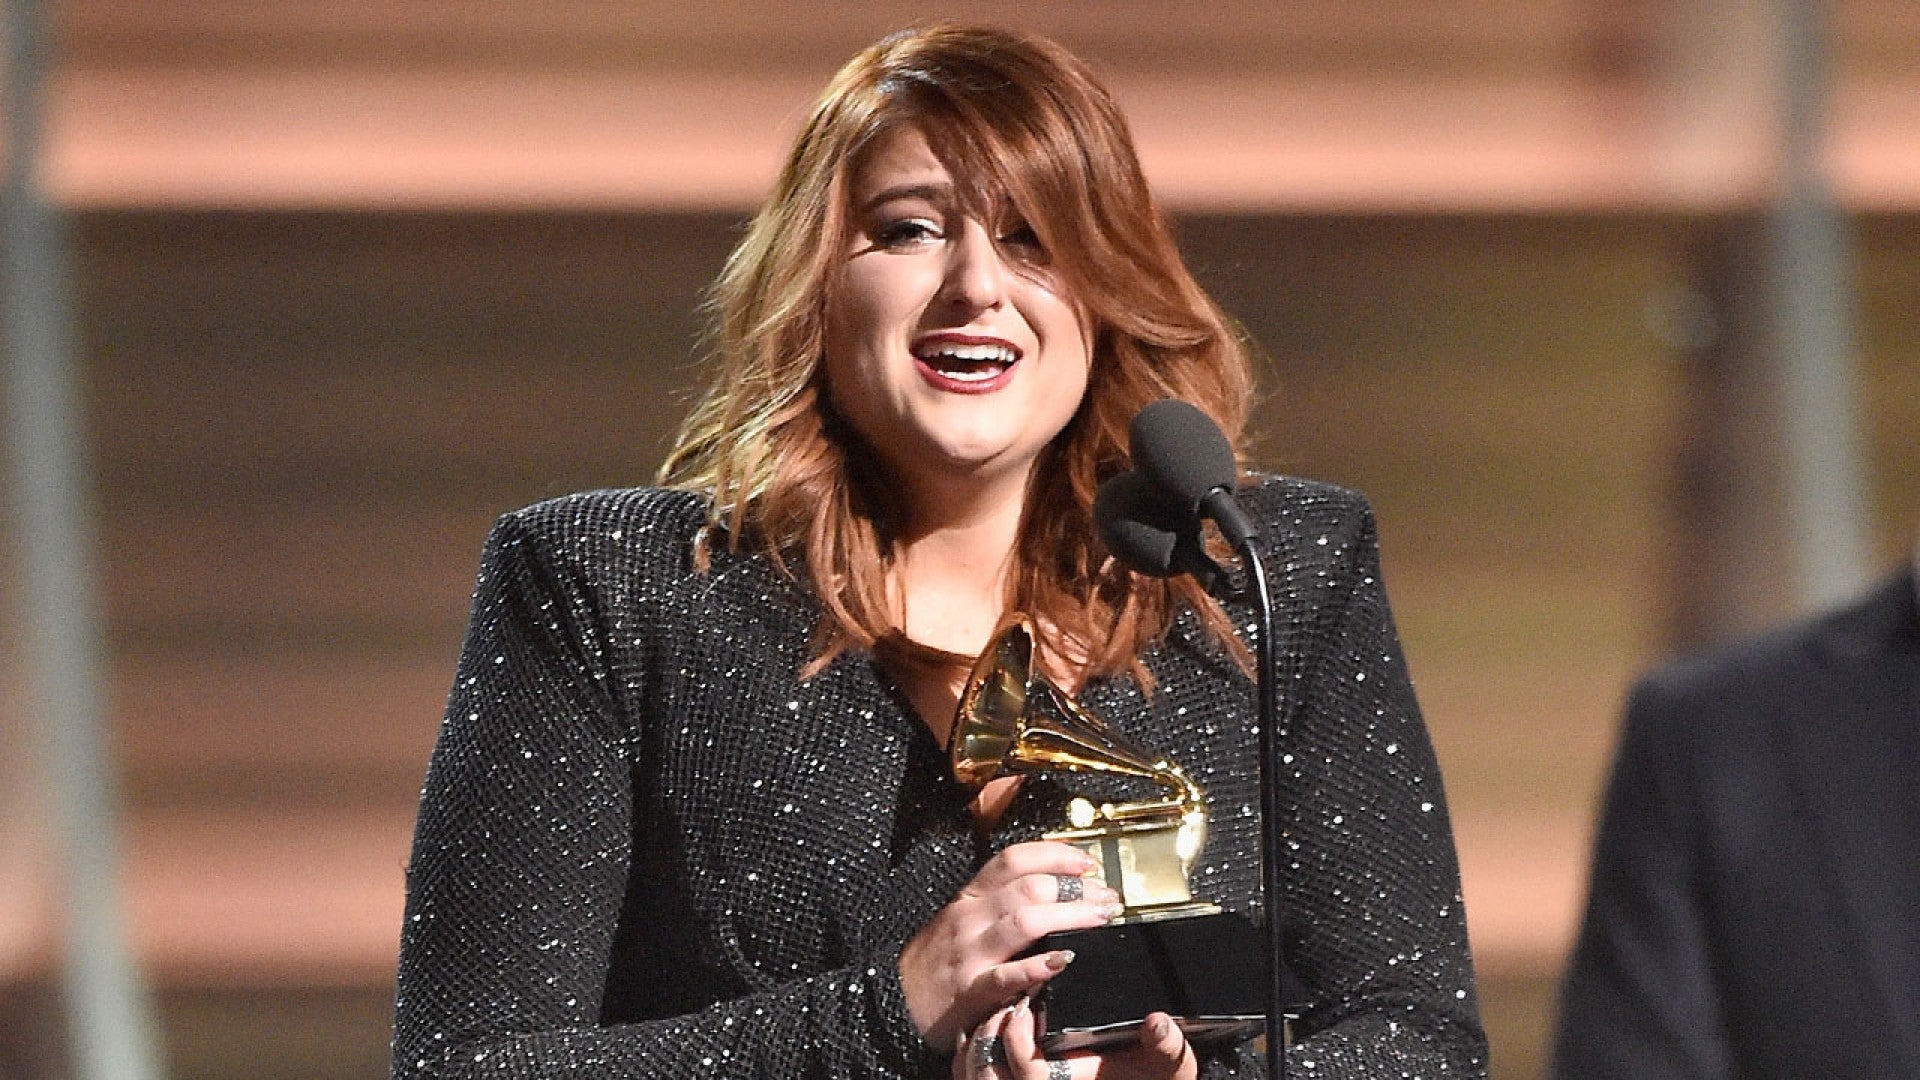 Meghan Trainor Wants To Meet Taylor Swift at the Grammys